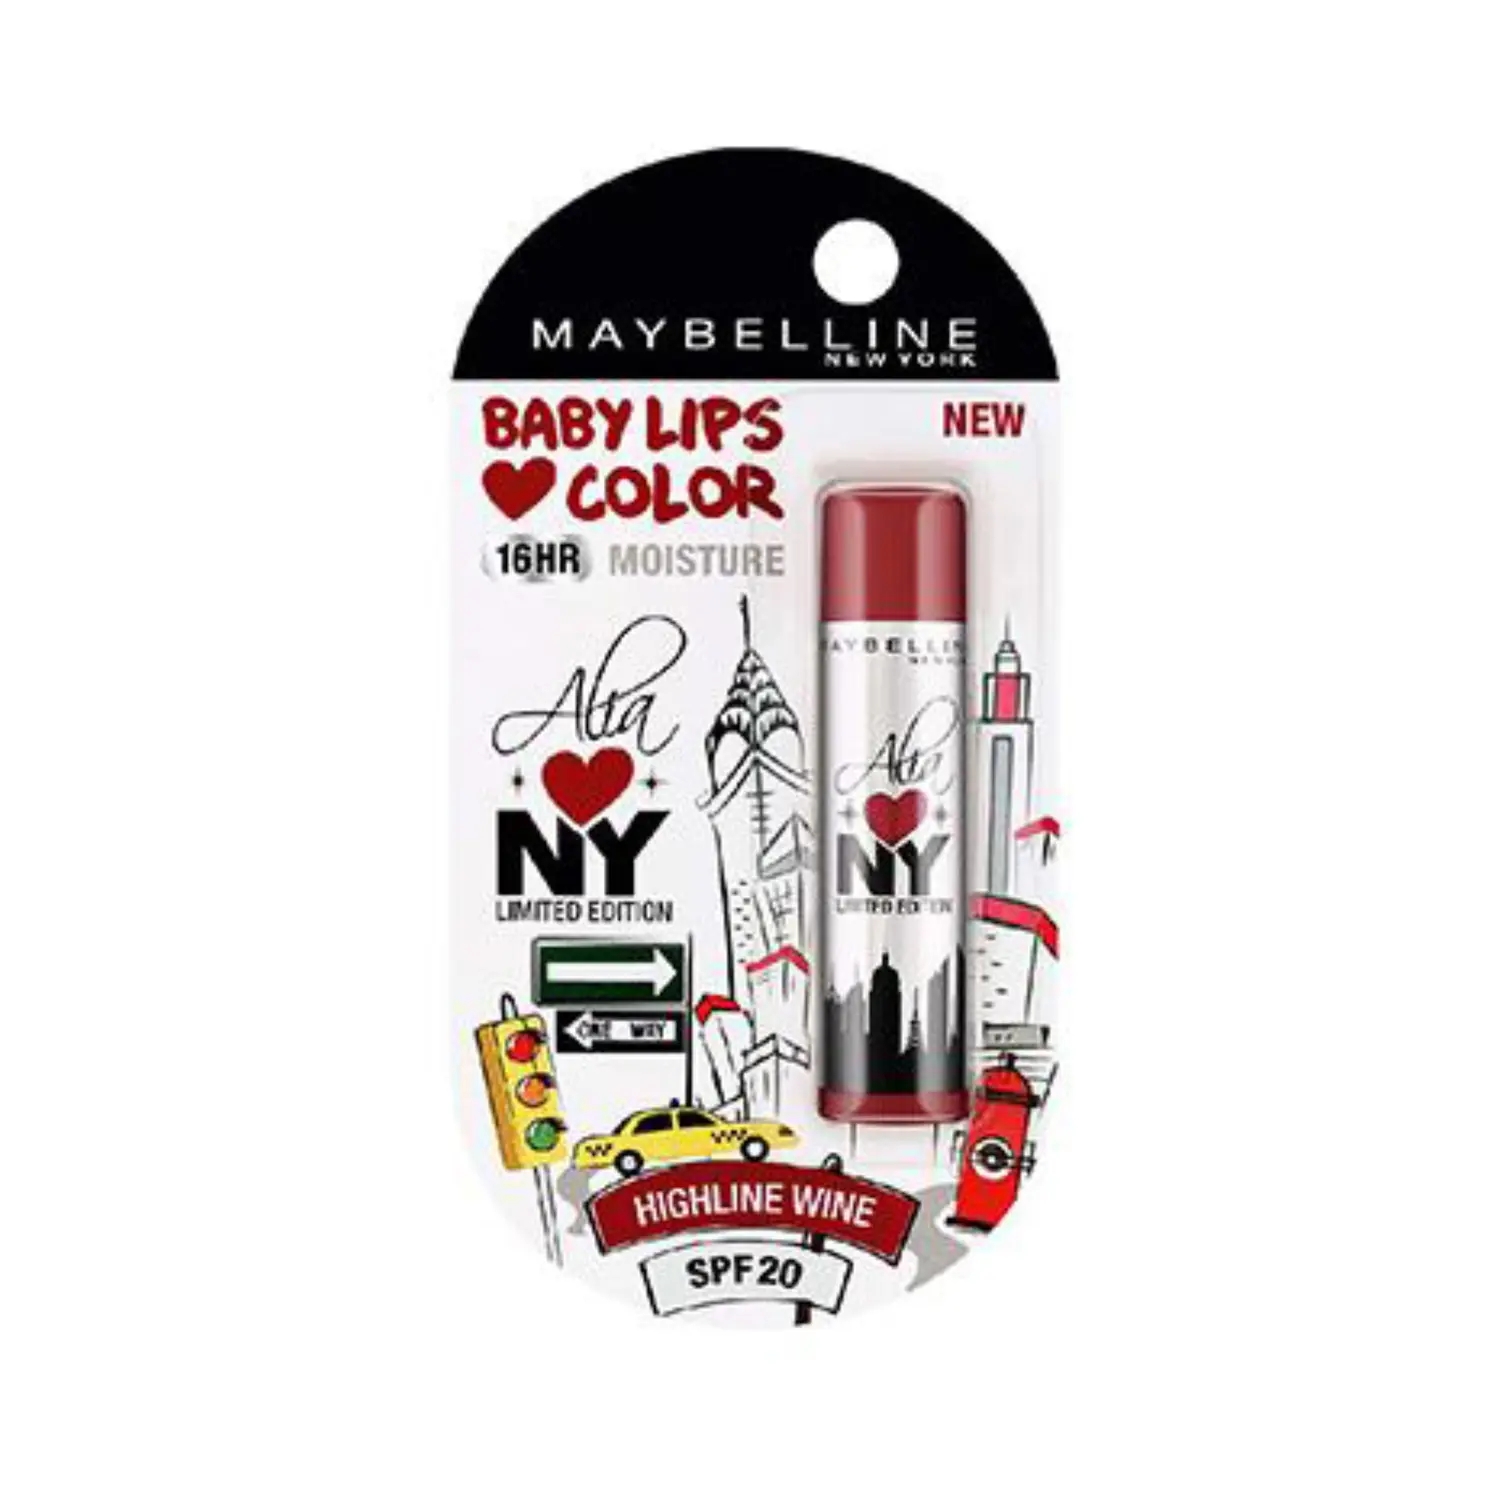 Maybelline New York | Maybelline New York Baby Lips Colour Limited Edition Lip Balm - Highline Wine (4g)